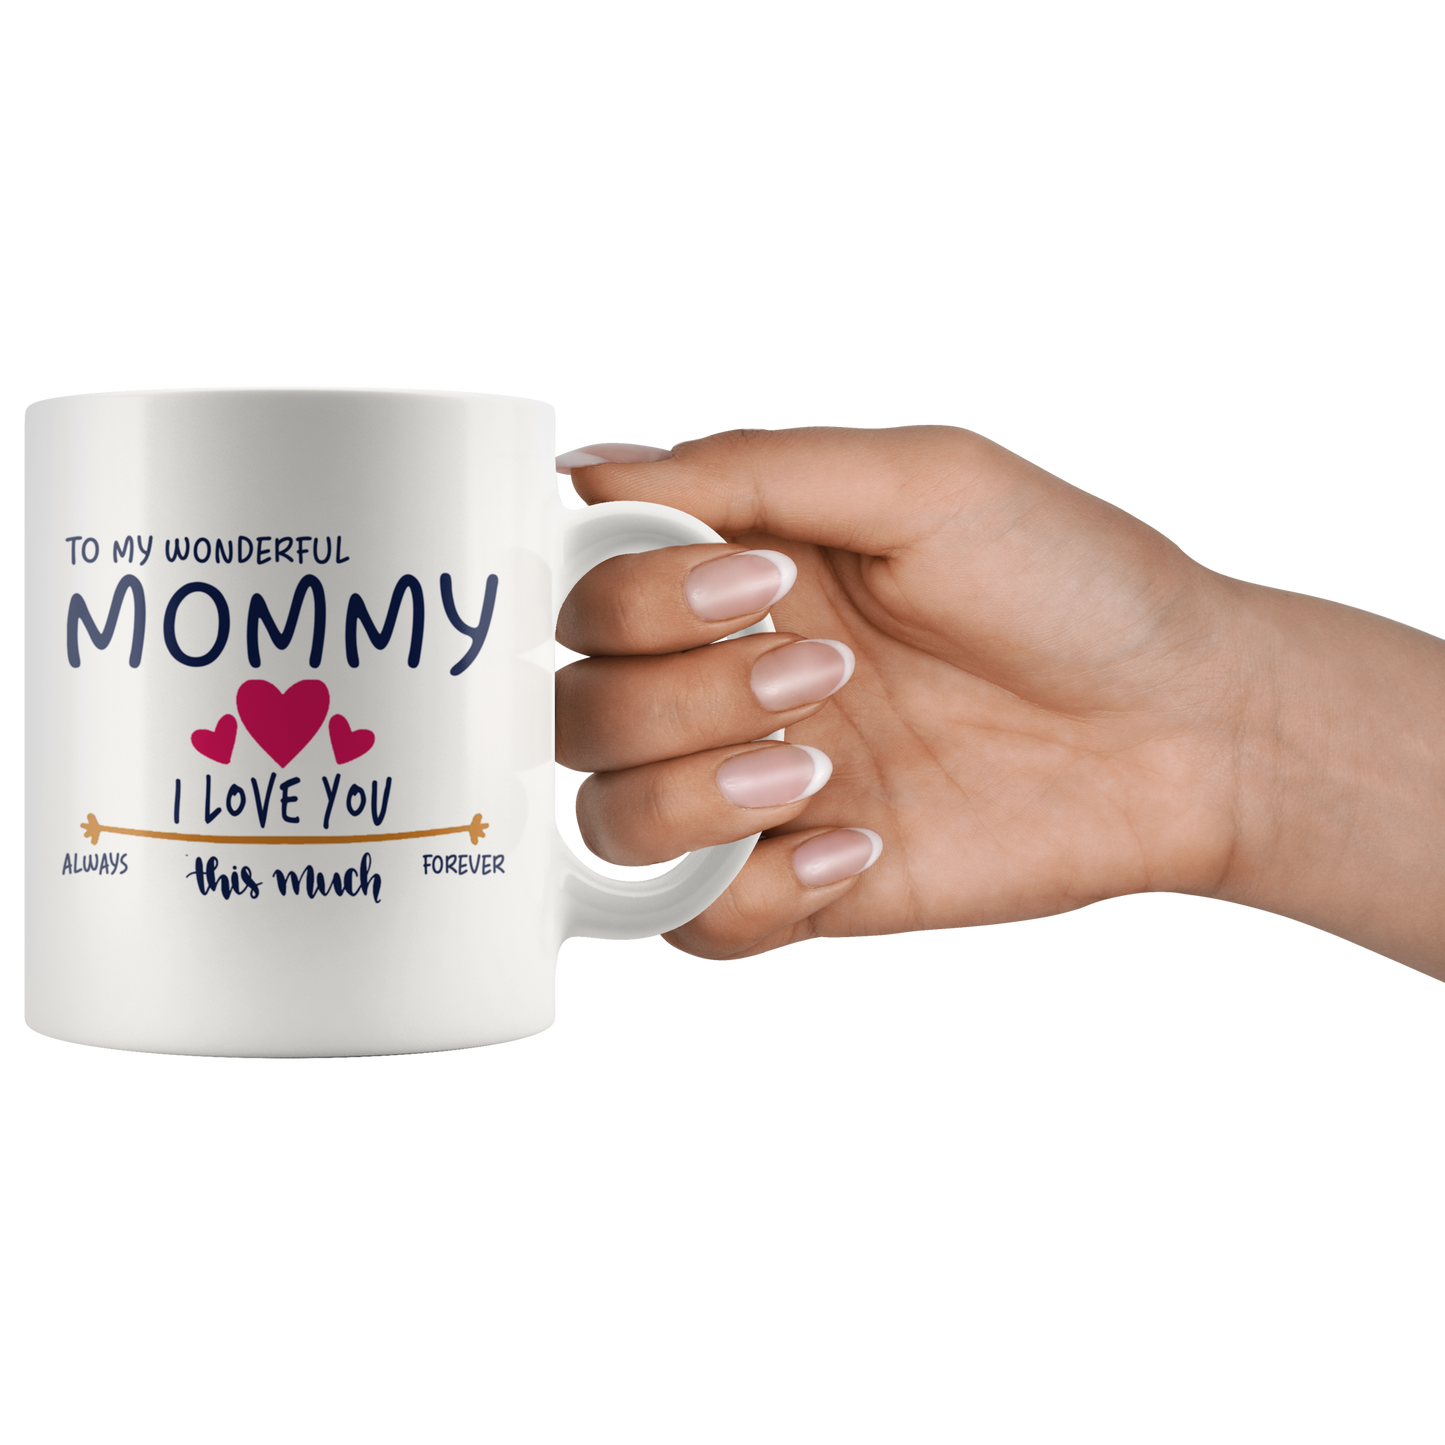 M-20470216-sp-23434 - Mom Day Gifts From Daughter or Son - To My Wonderful Mommy I